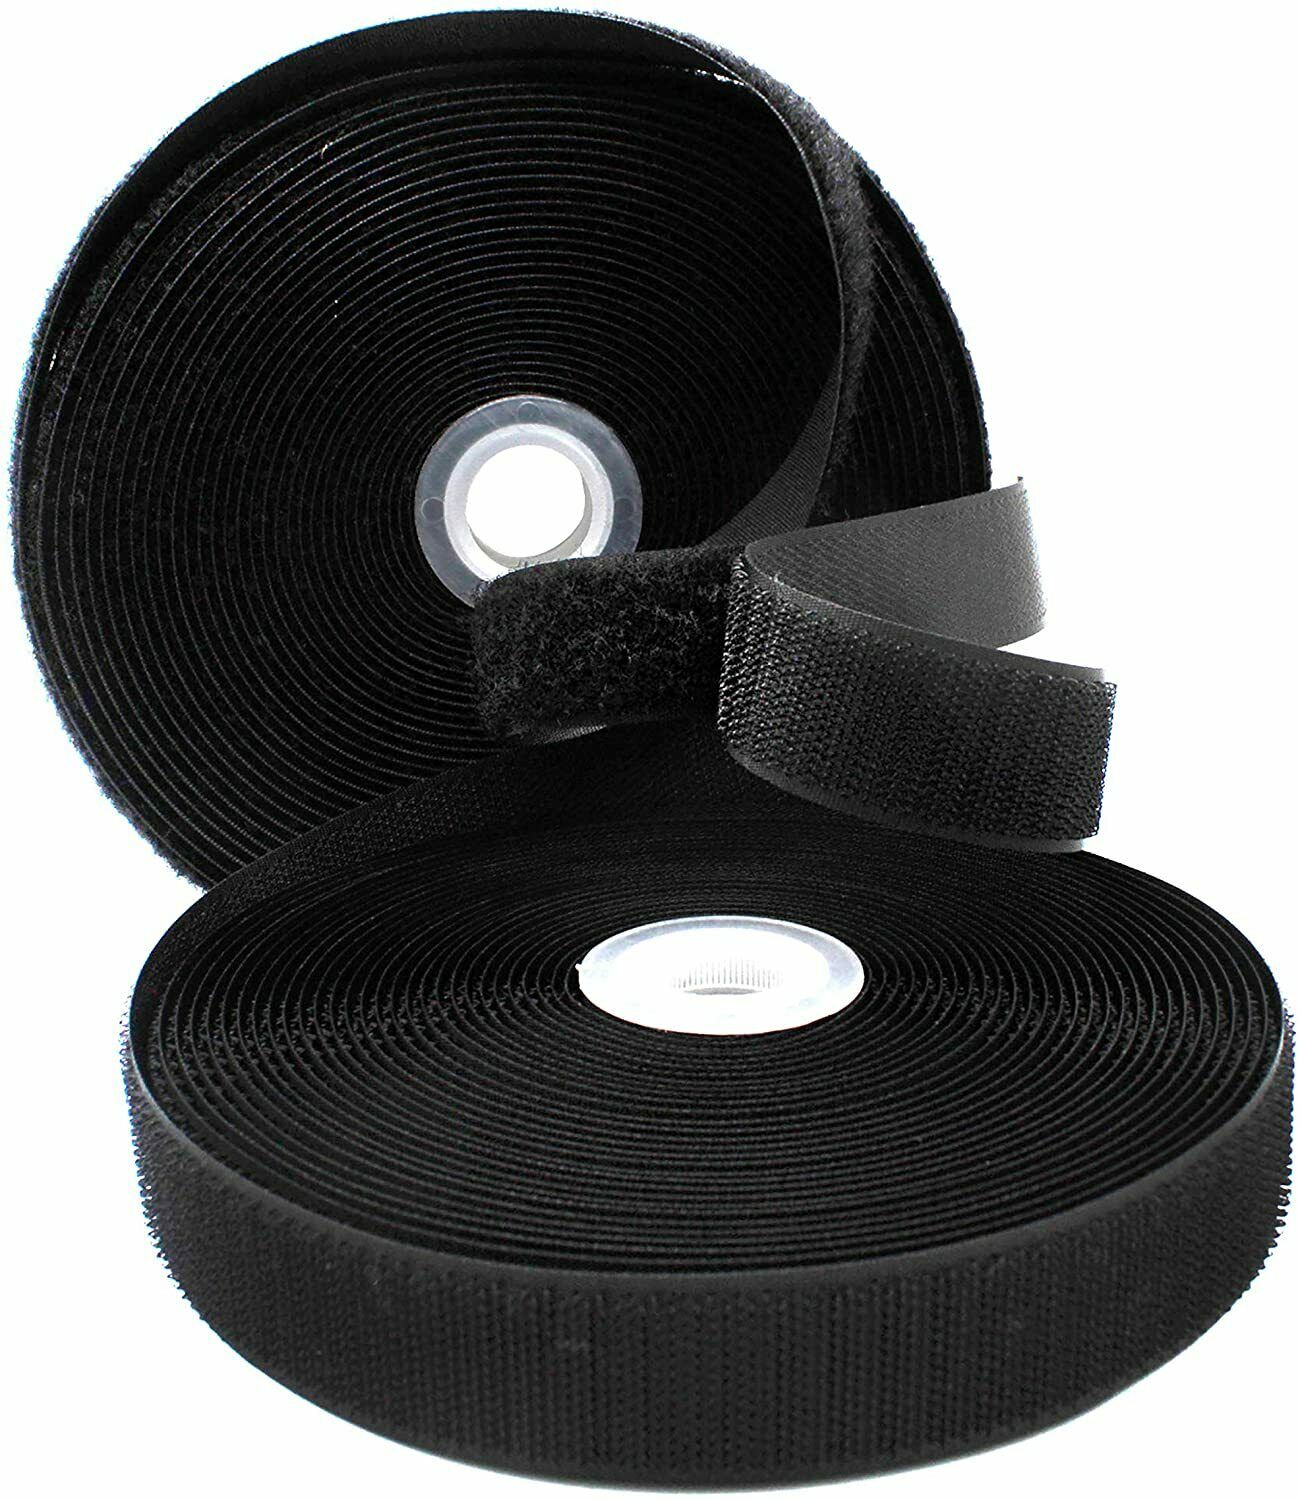 YKK Sew on Hook & Loop Tape Fastening Products Group 5 or 10 Yds - Black, White